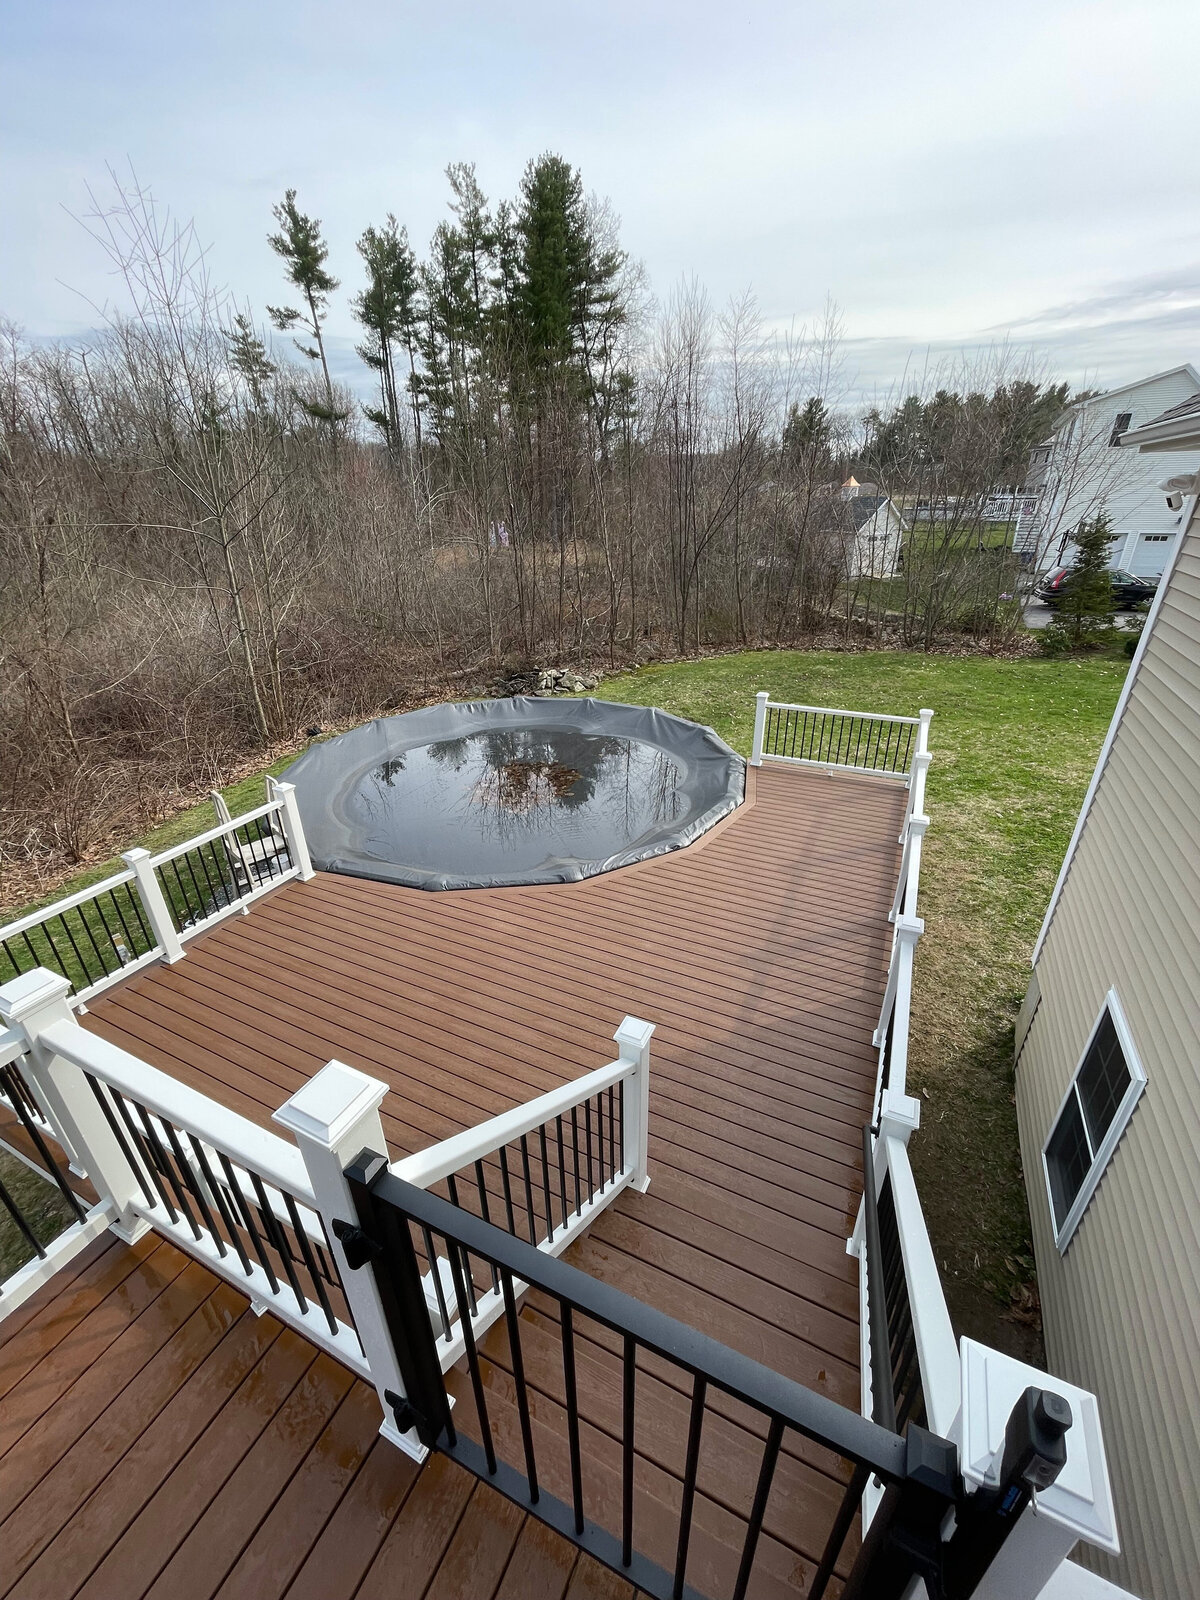 A look down onto a brown composite pool deck built around an above ground pool by a West Boylston Deck Contractor